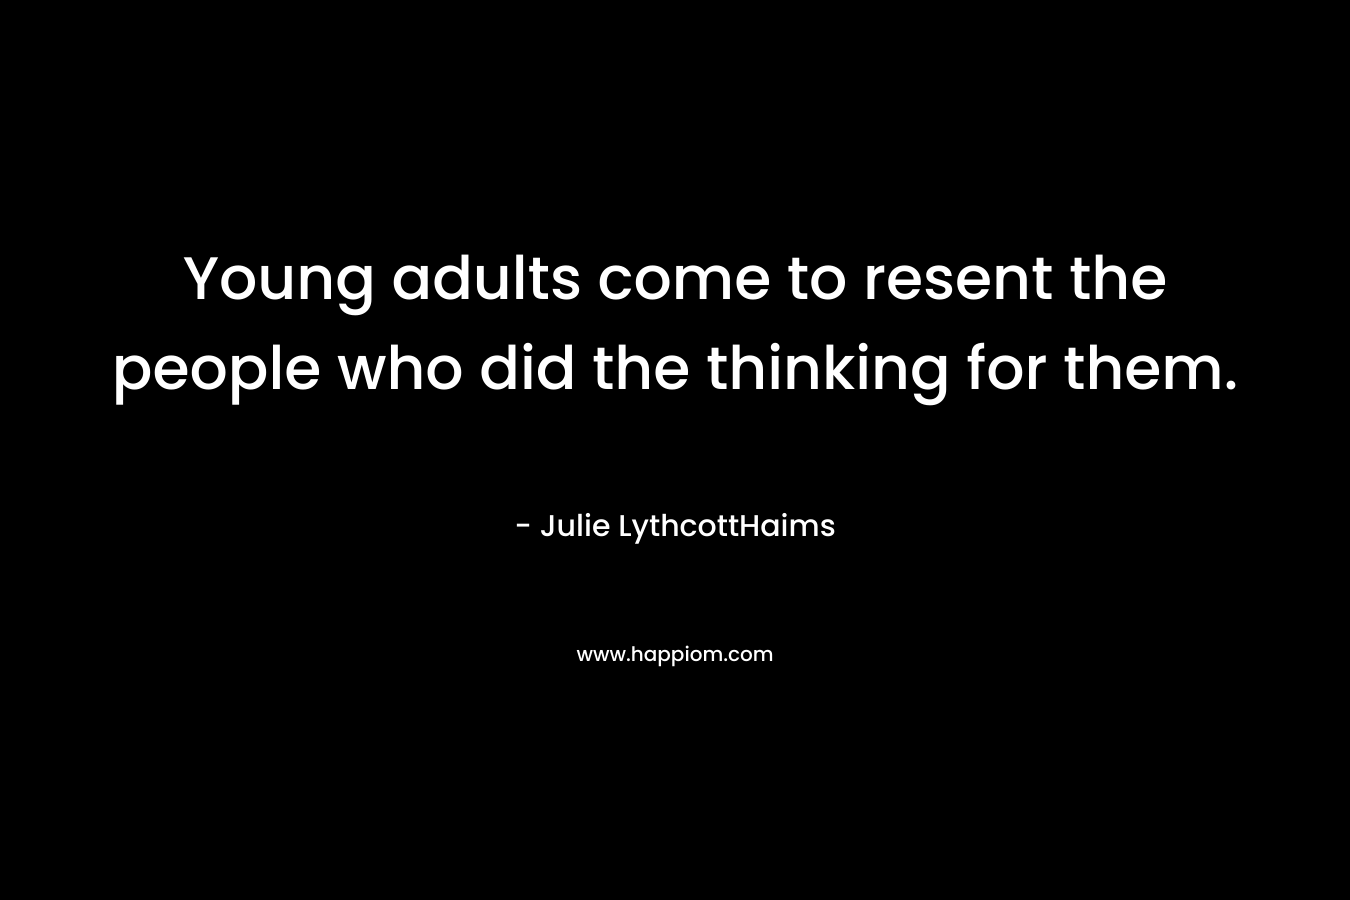 Young adults come to resent the people who did the thinking for them. – Julie LythcottHaims